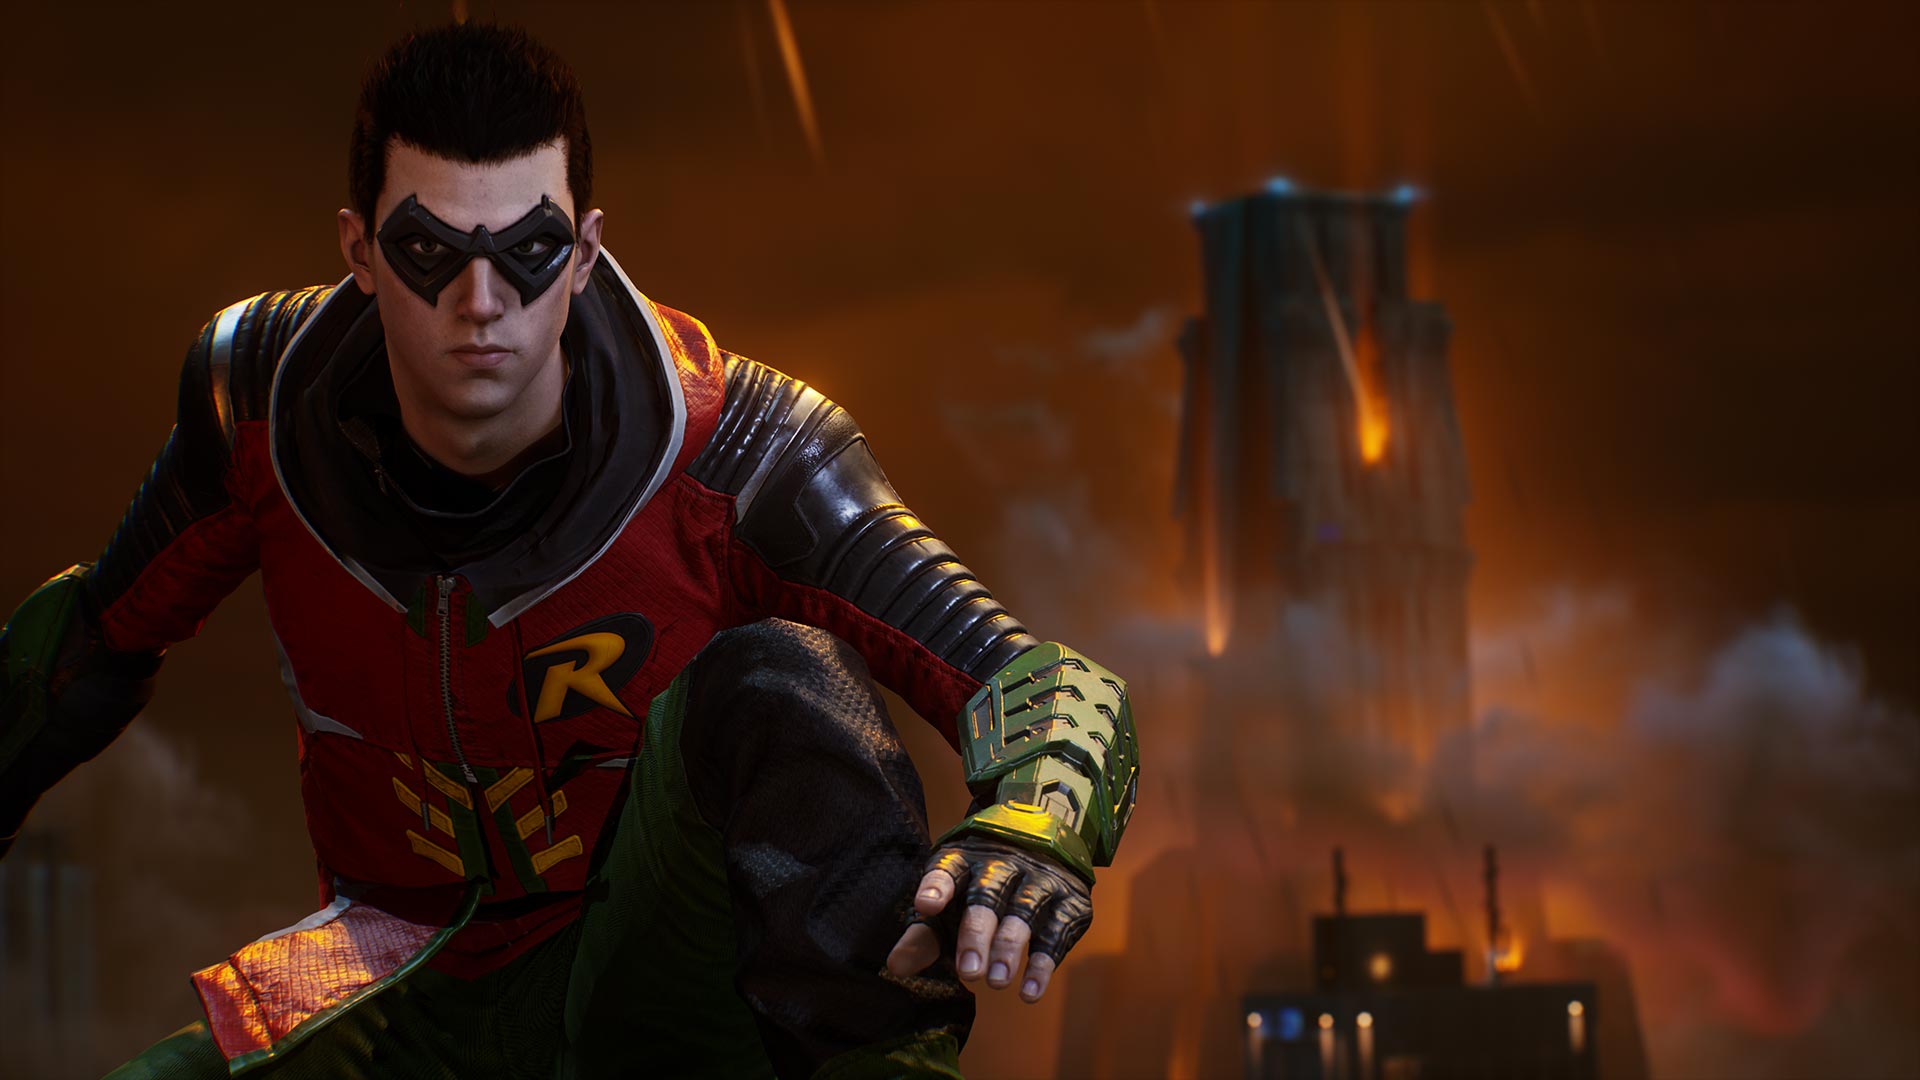 Gotham Knights - Robin does a superhero pose in front of a skyscraper or a really large vape pen